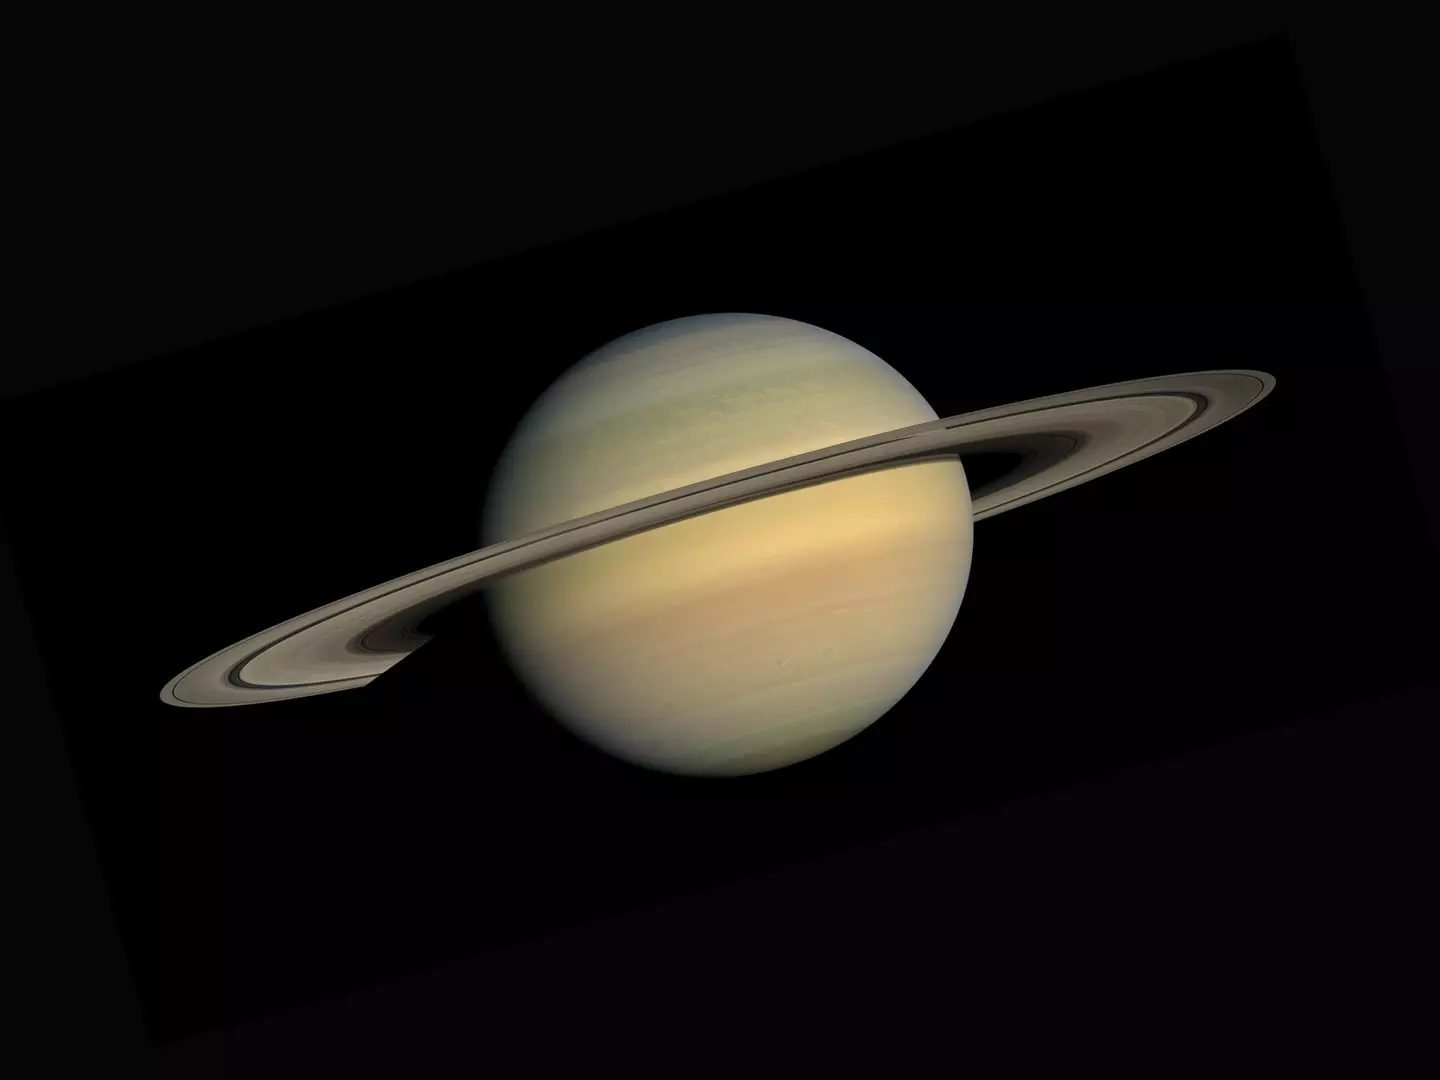 Saturn Return takes place roughly every 27 to 29.5 years (